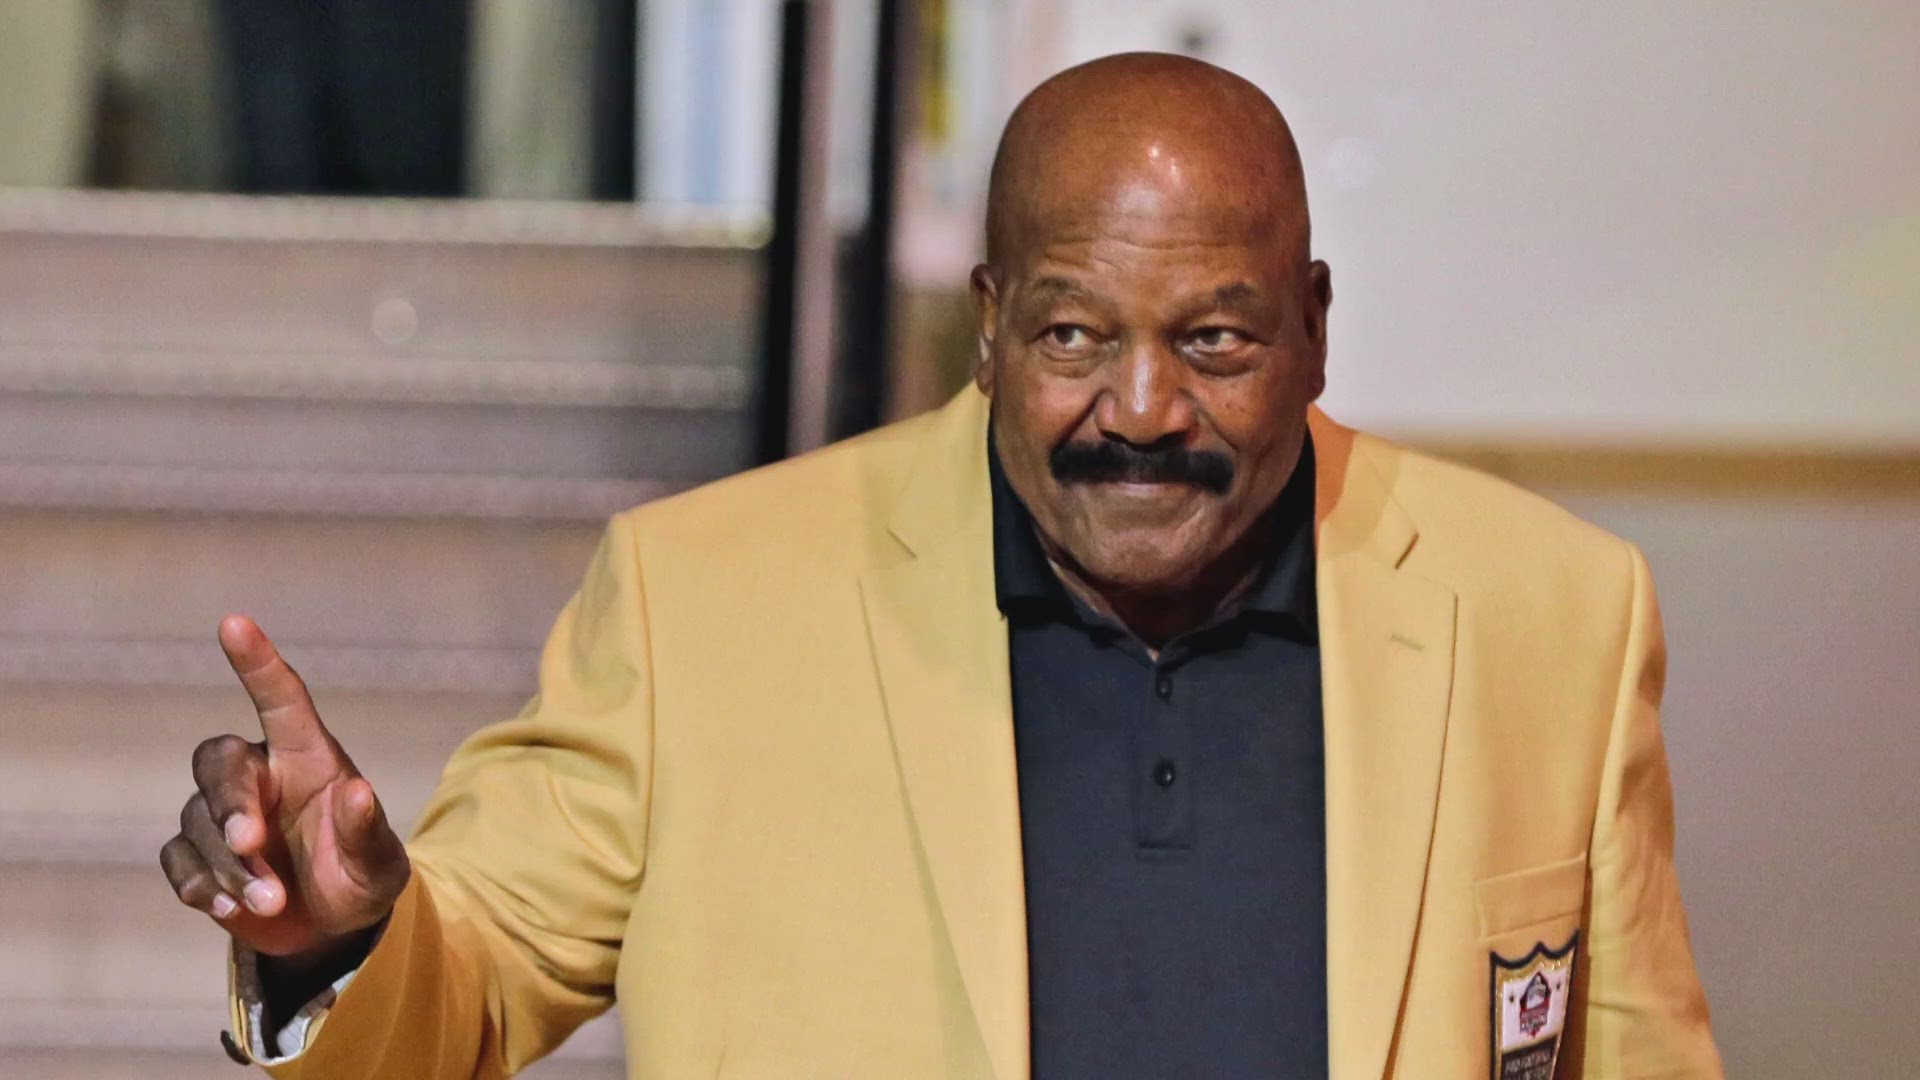 The pro football Hall of Famer retired at the peak of his incredible career to become an actor as well as a prominent civil rights advocate during the 1960s.